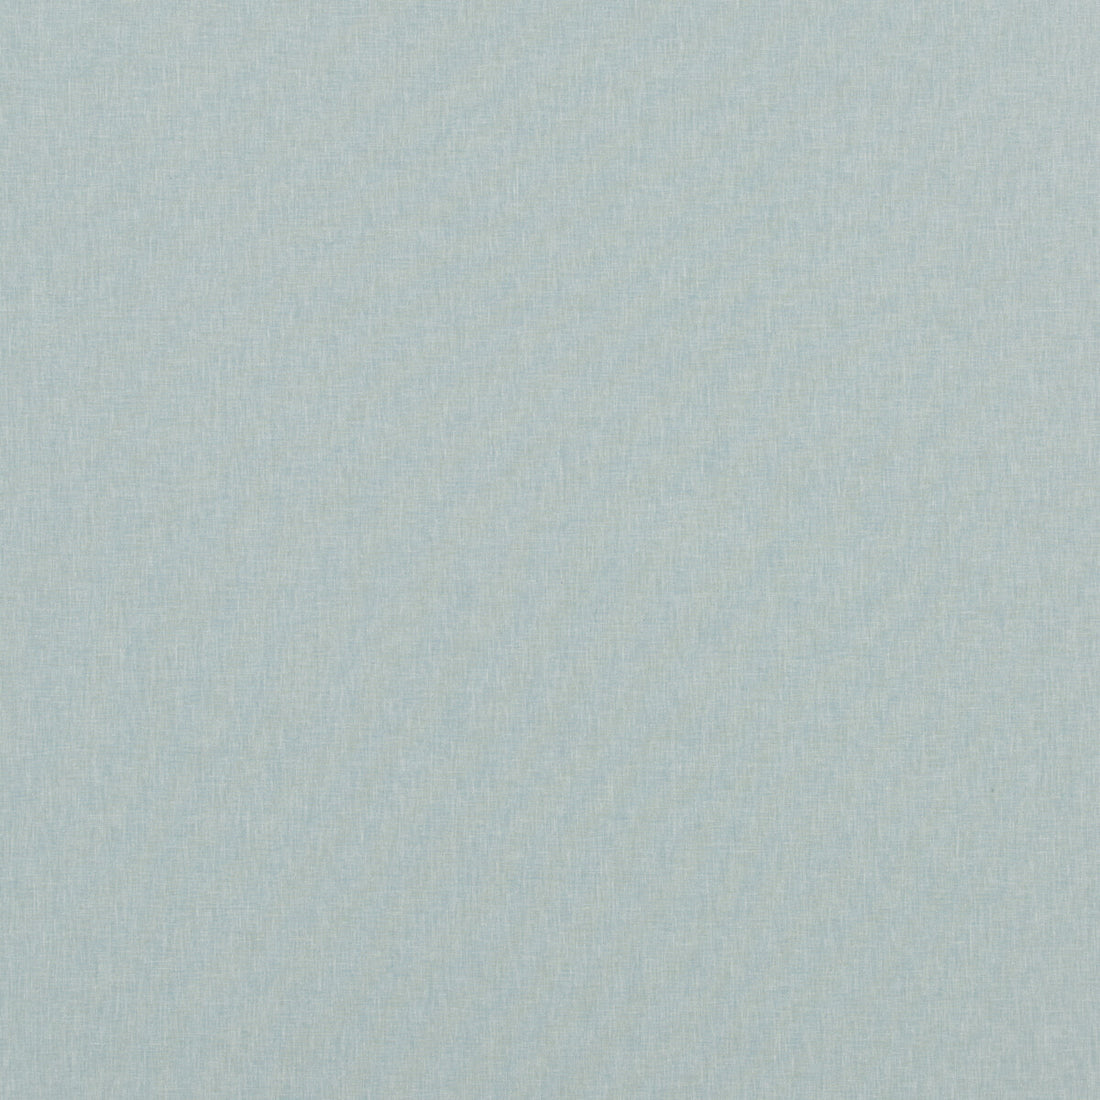 Carnival Plain fabric in sky color - pattern PF50420.602.0 - by Baker Lifestyle in the Carnival collection